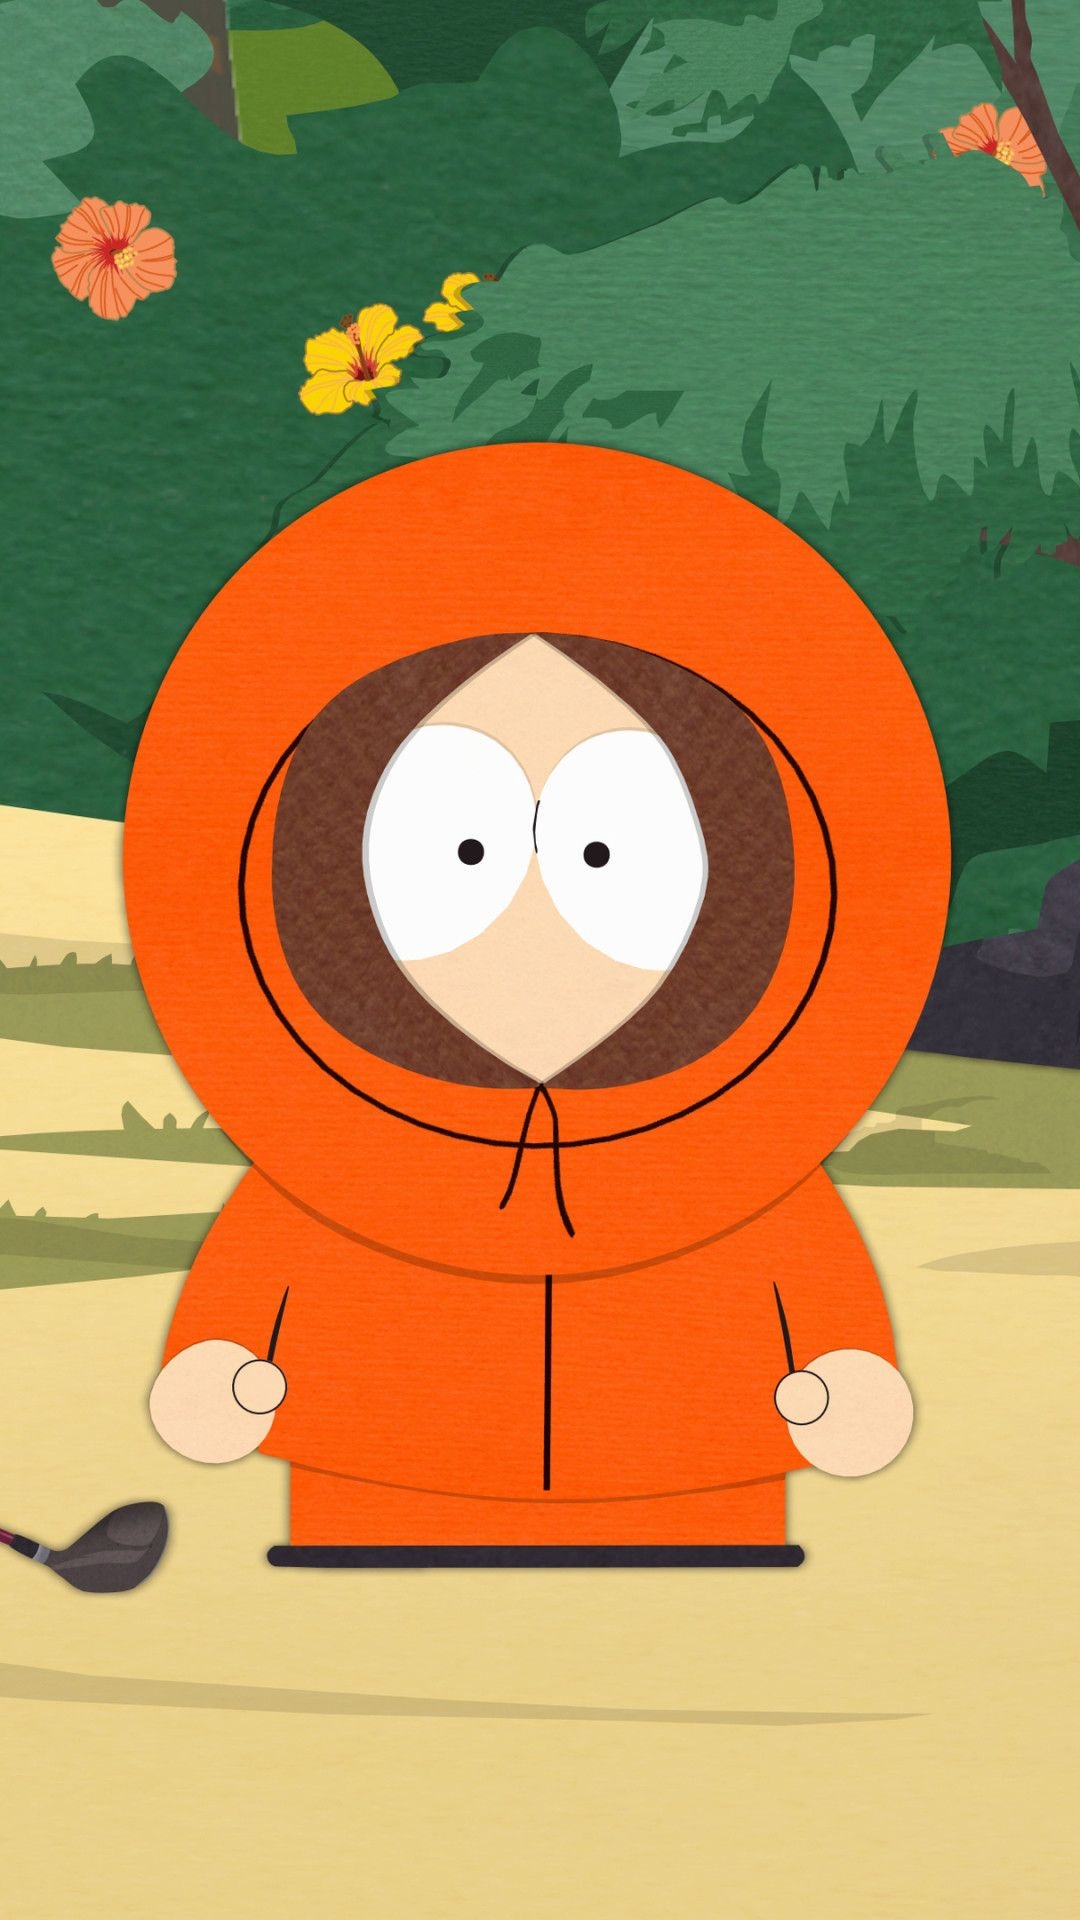 South Park Kenny wallpapers, South Park, Cartoon, Comedy, 1080x1920 Full HD Phone